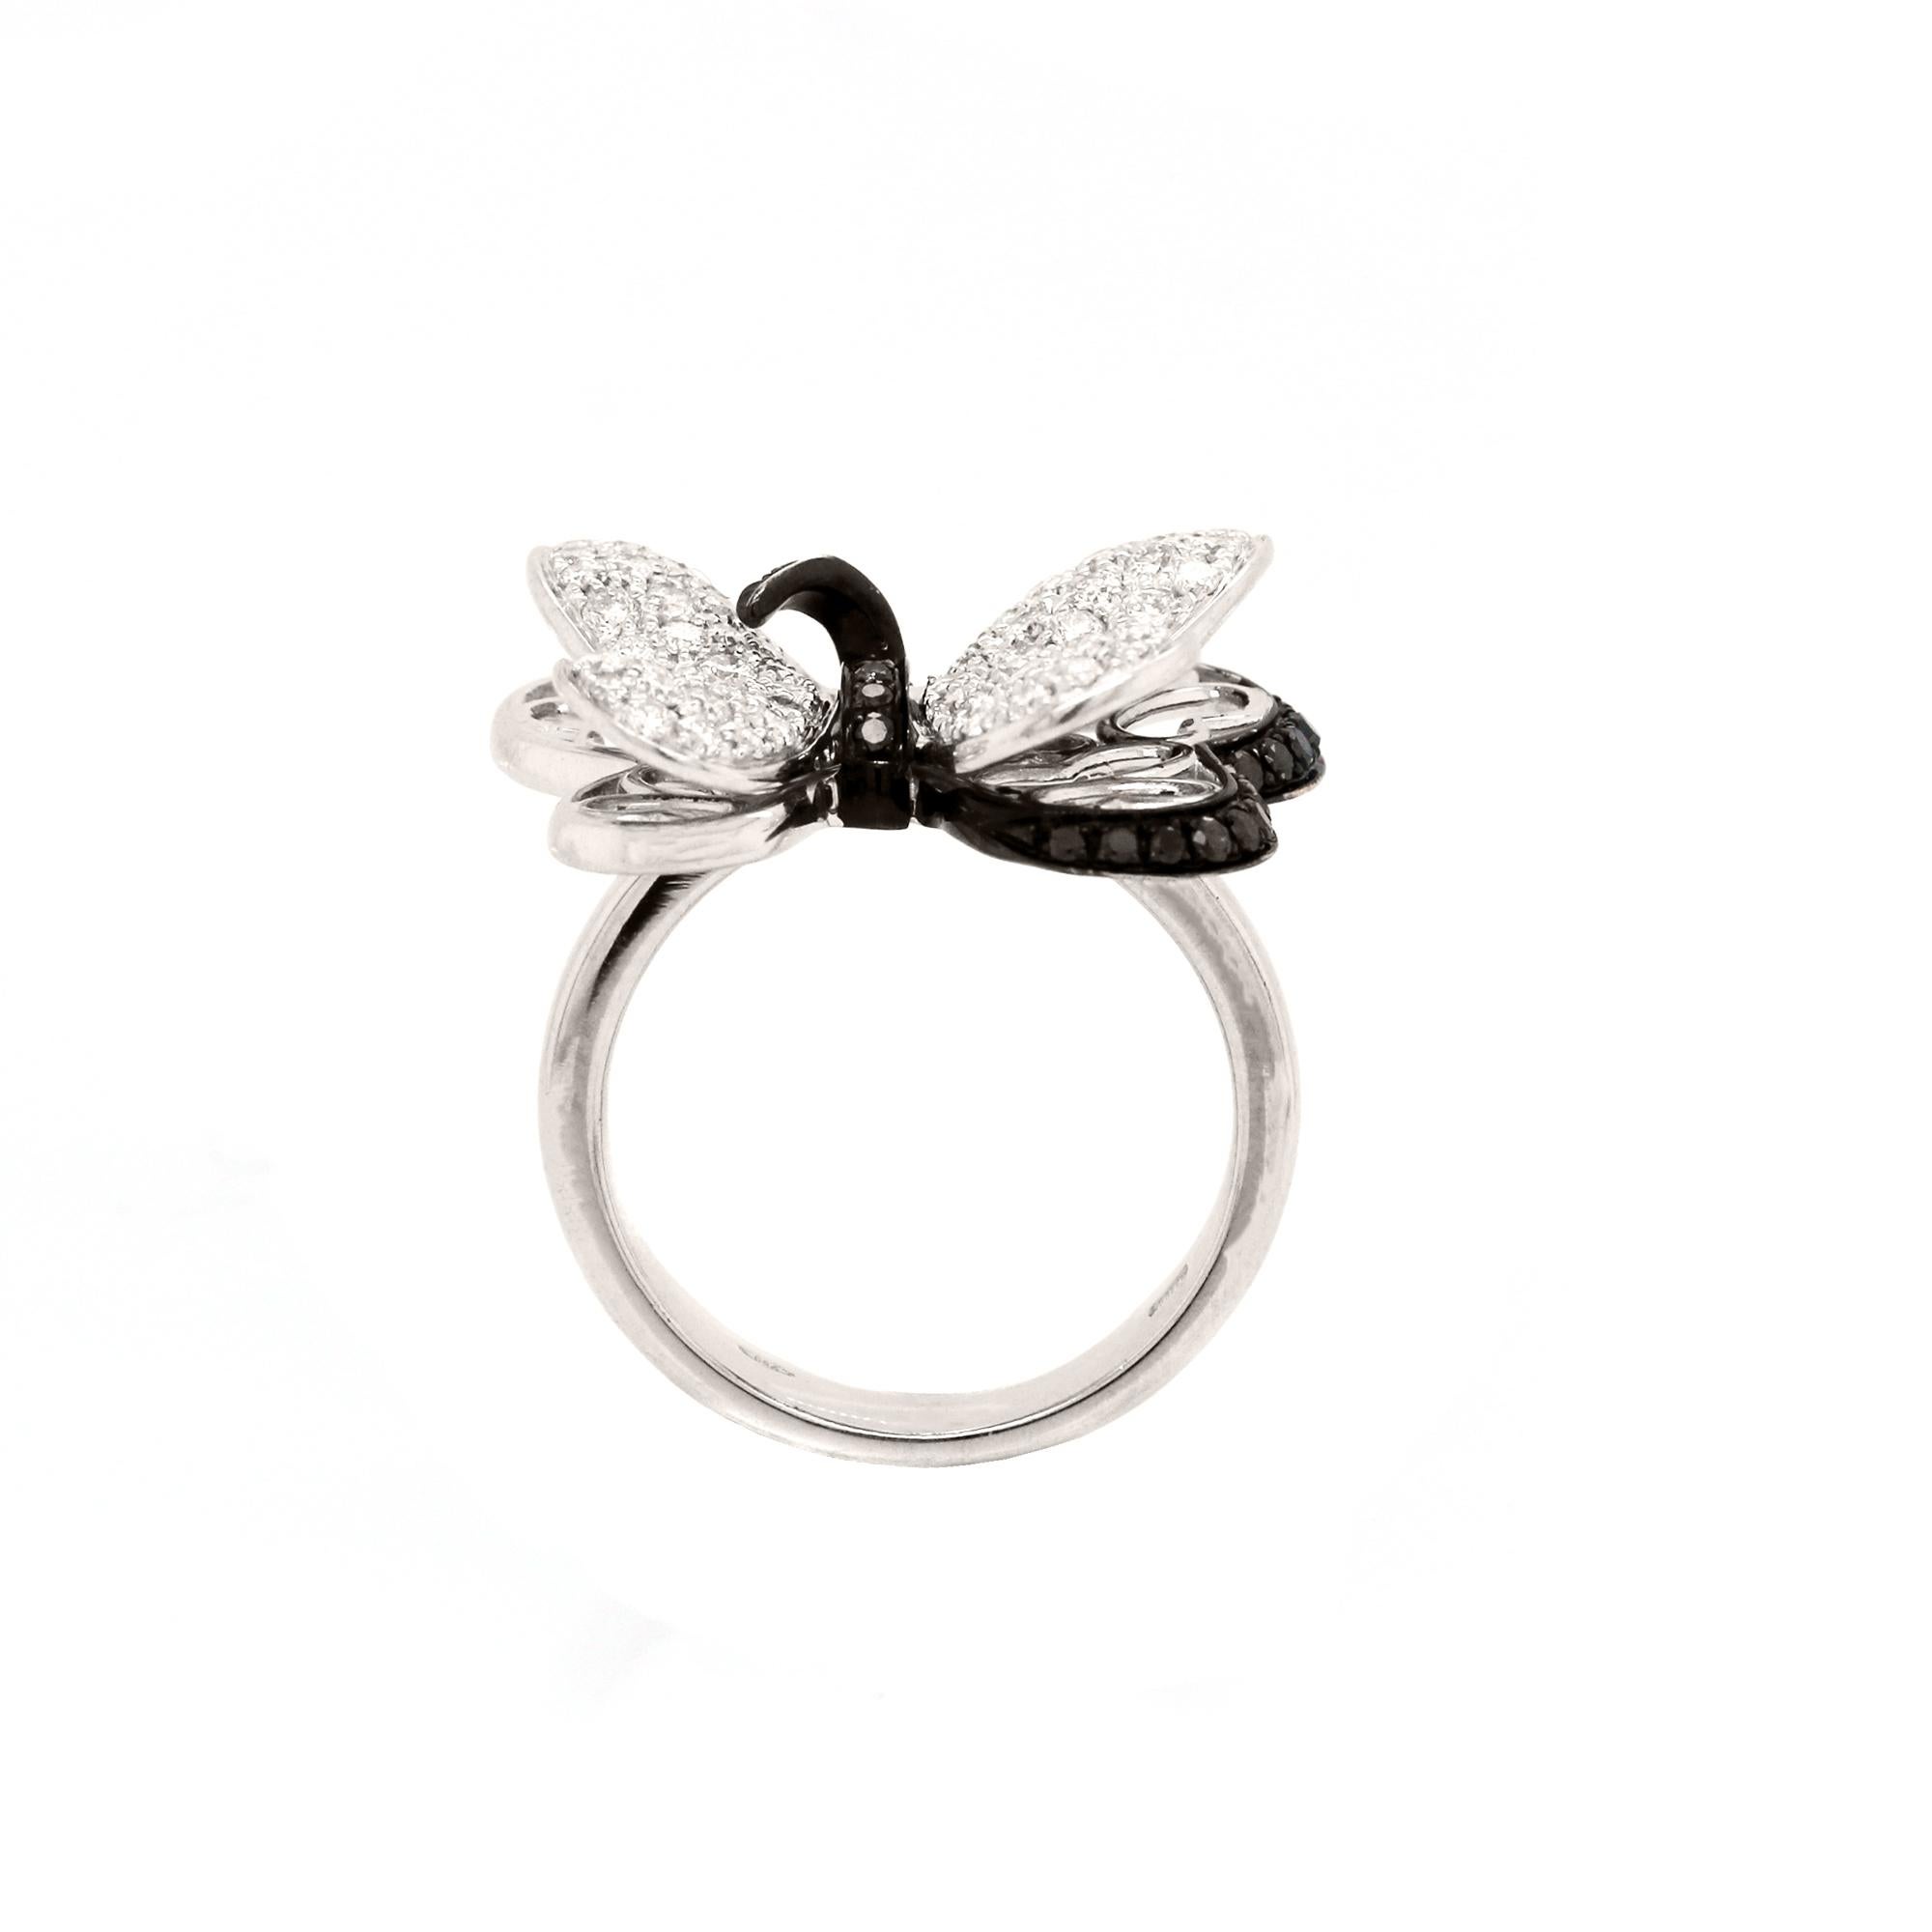 18K White Gold Butterfly Ring with Black and White Diamonds

3D butterfly ring features white diamonds in the face with black diamonds as the accents to give it the 3D design

1.50 carat Diamonds total weight

Ring is a size 7. Sizable.

Ring face